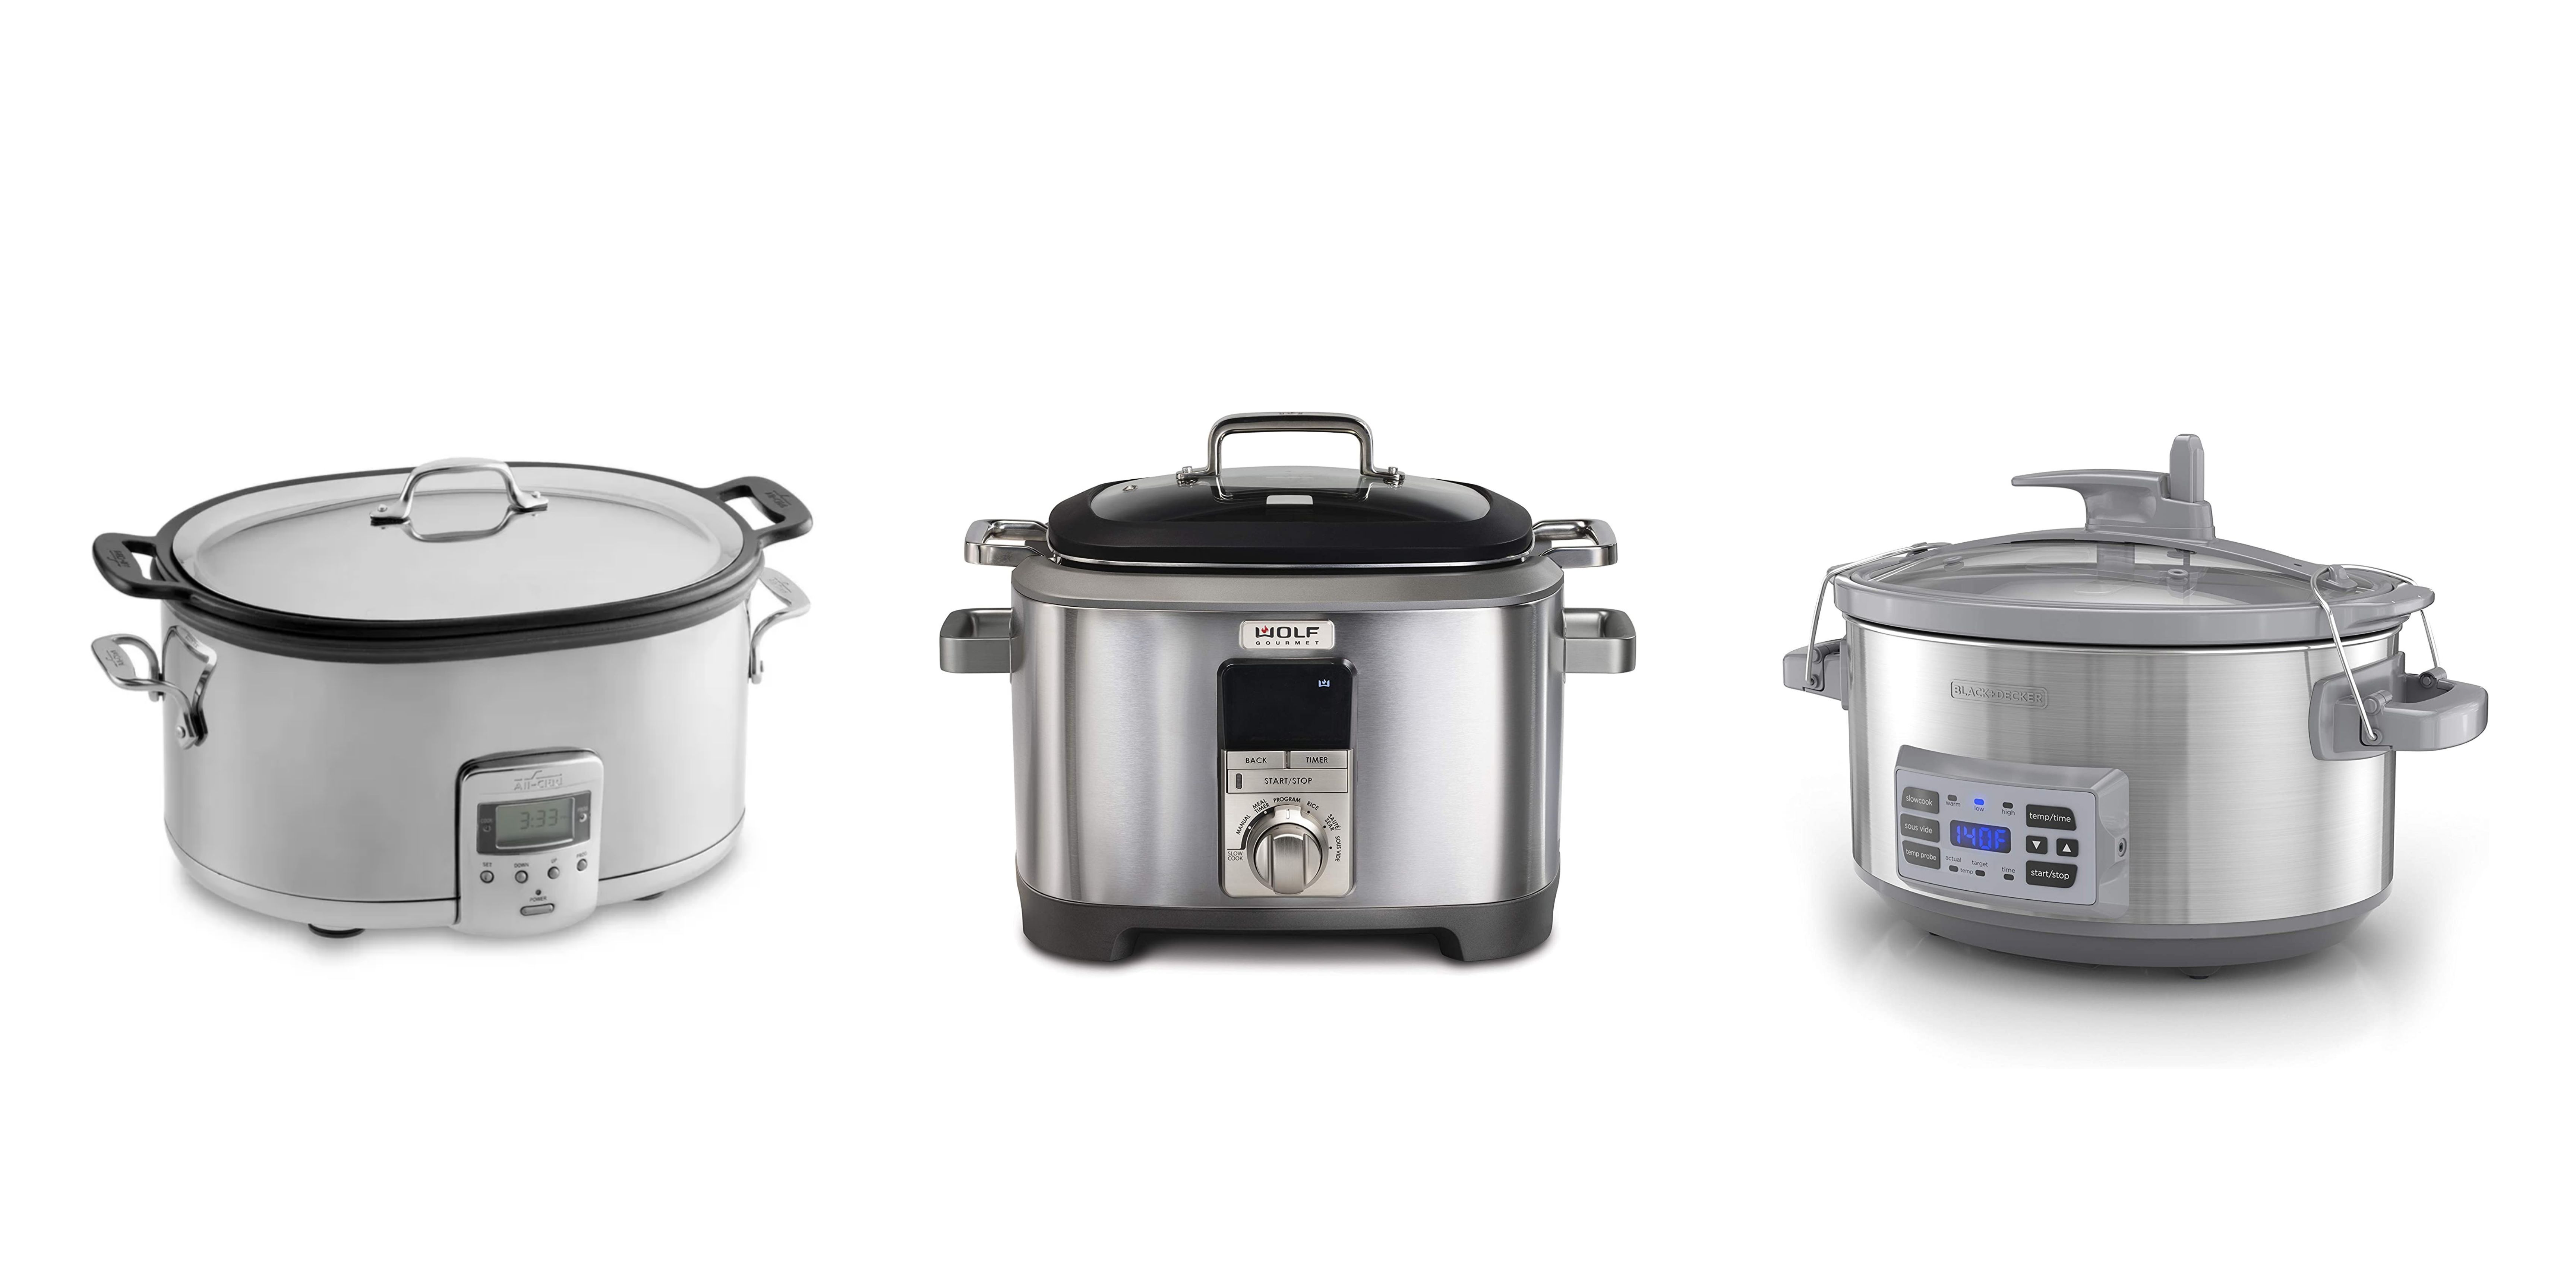 Best Slow Cookers And Crockpots - Top-Rated Slow Cookers